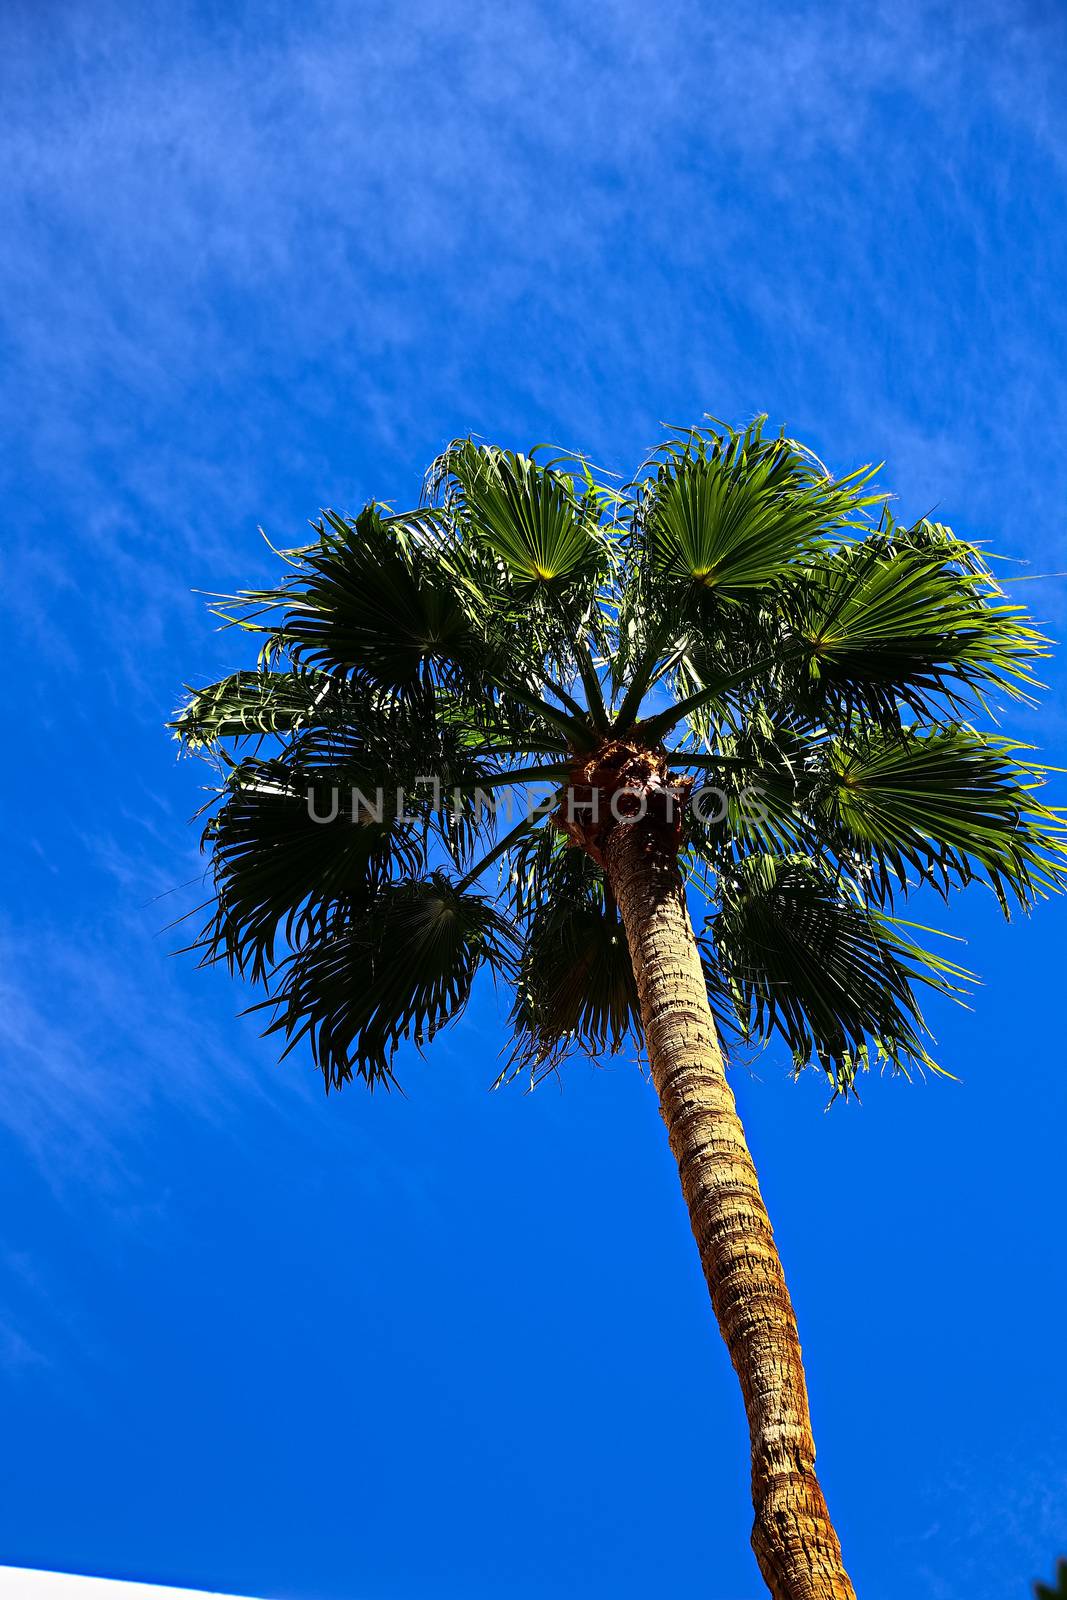 Classic Florida palm tree background of blue sky.Close up photo of a bunch of Coconut palm trees with blue sky background. by USA-TARO